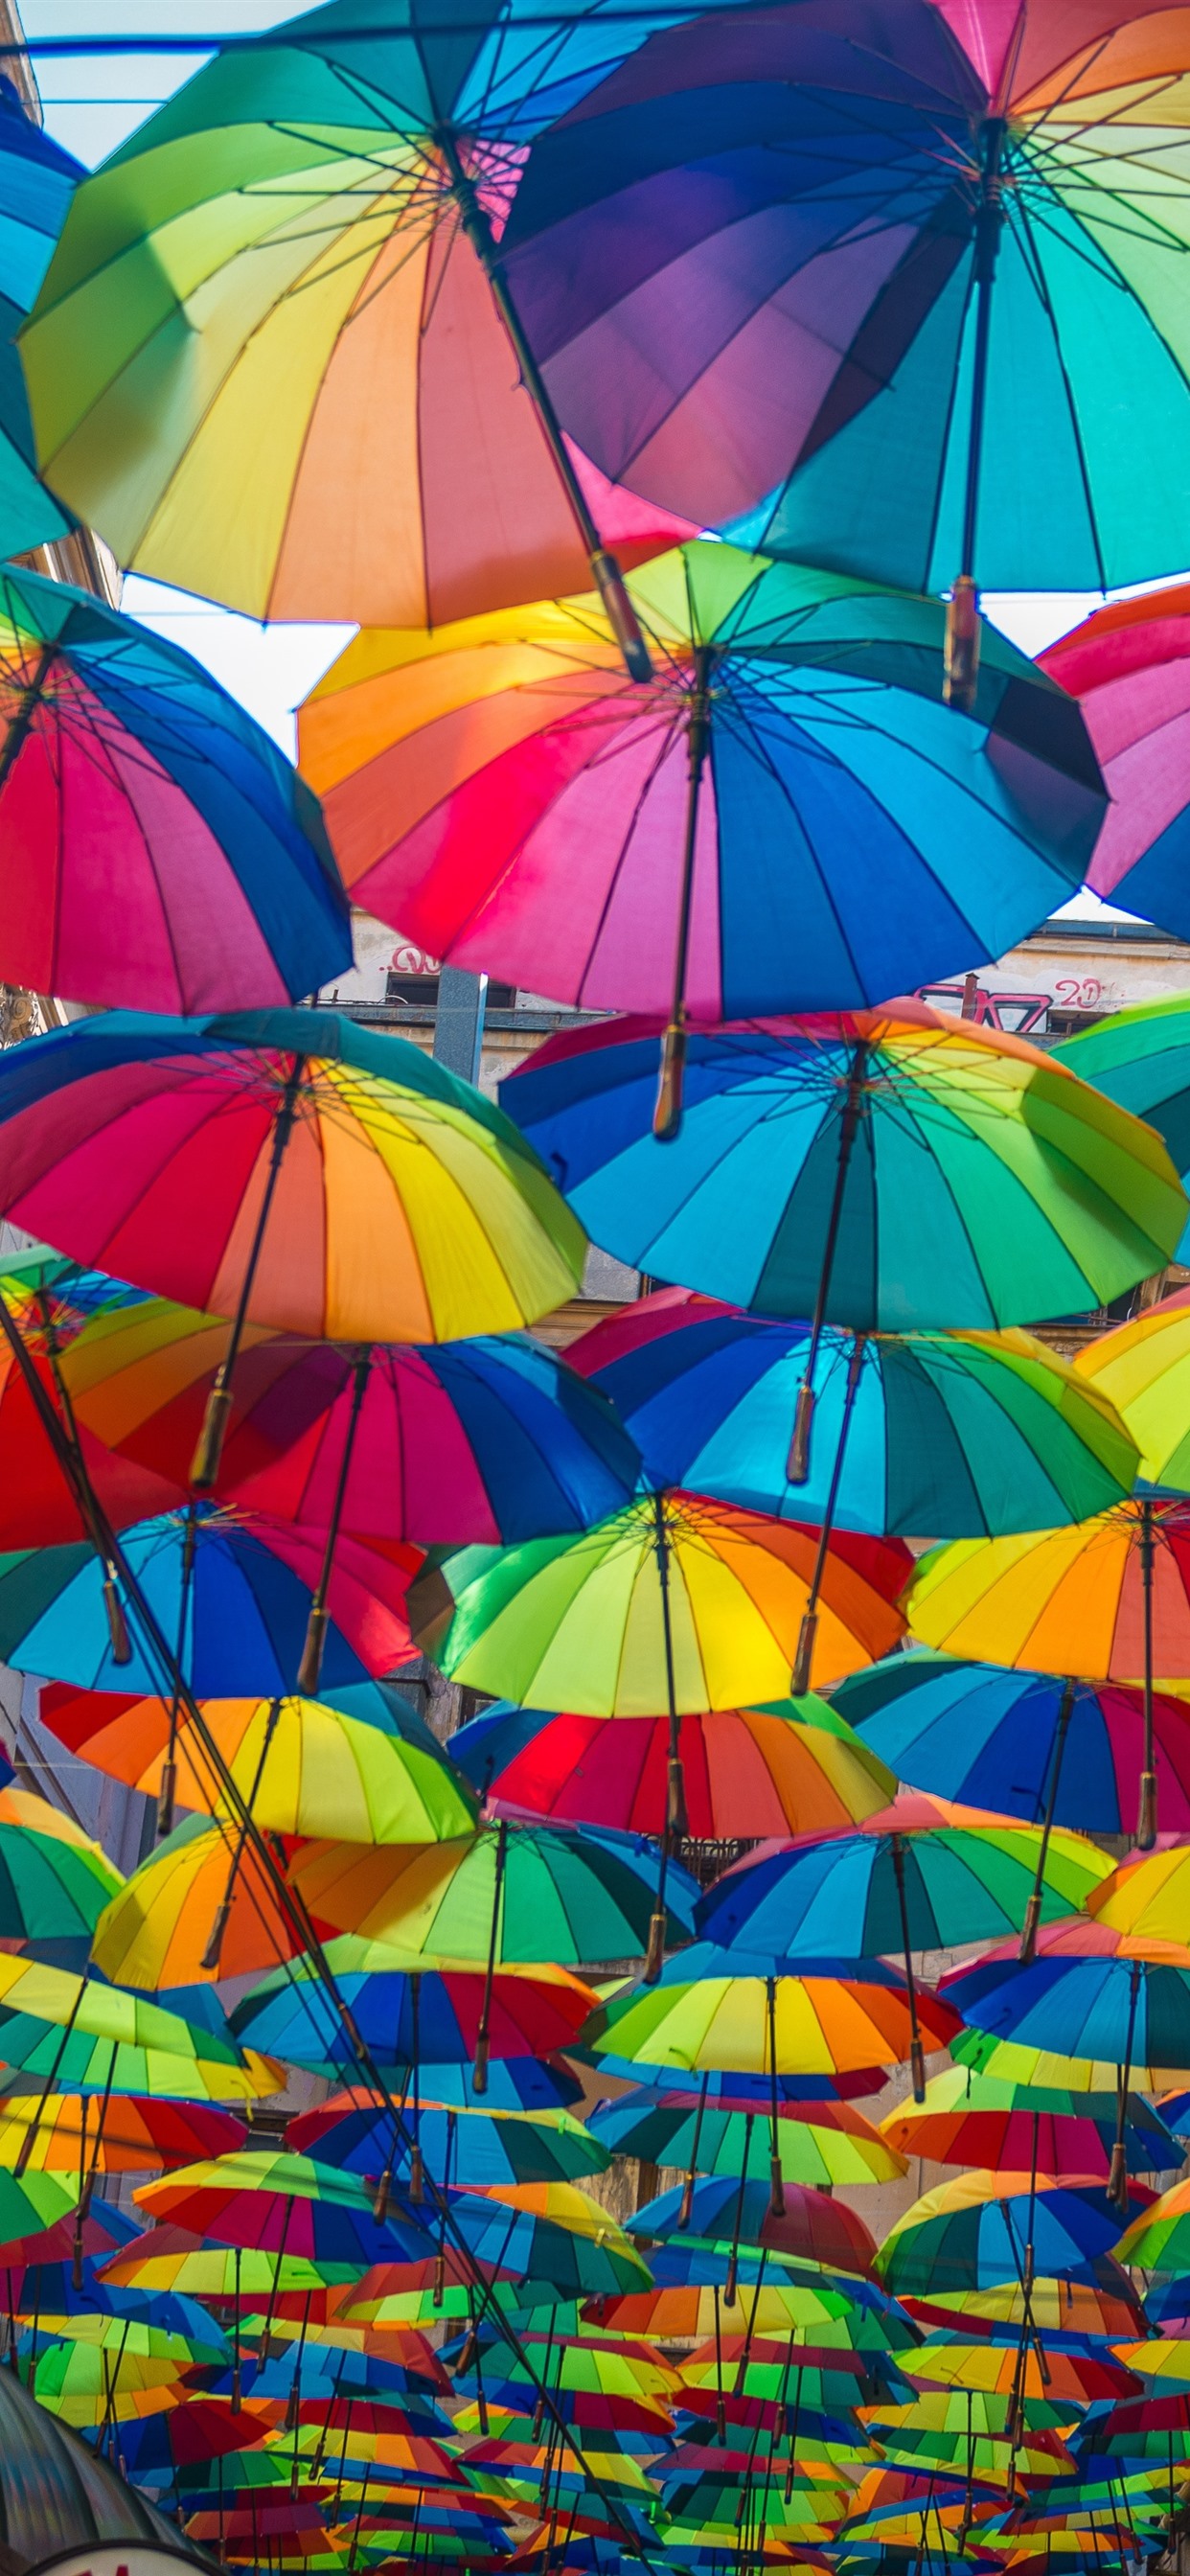 Iphone Wallpaper Many Colorful Umbrellas, City Street - Iphone Xs Wallpaper Bunt - HD Wallpaper 